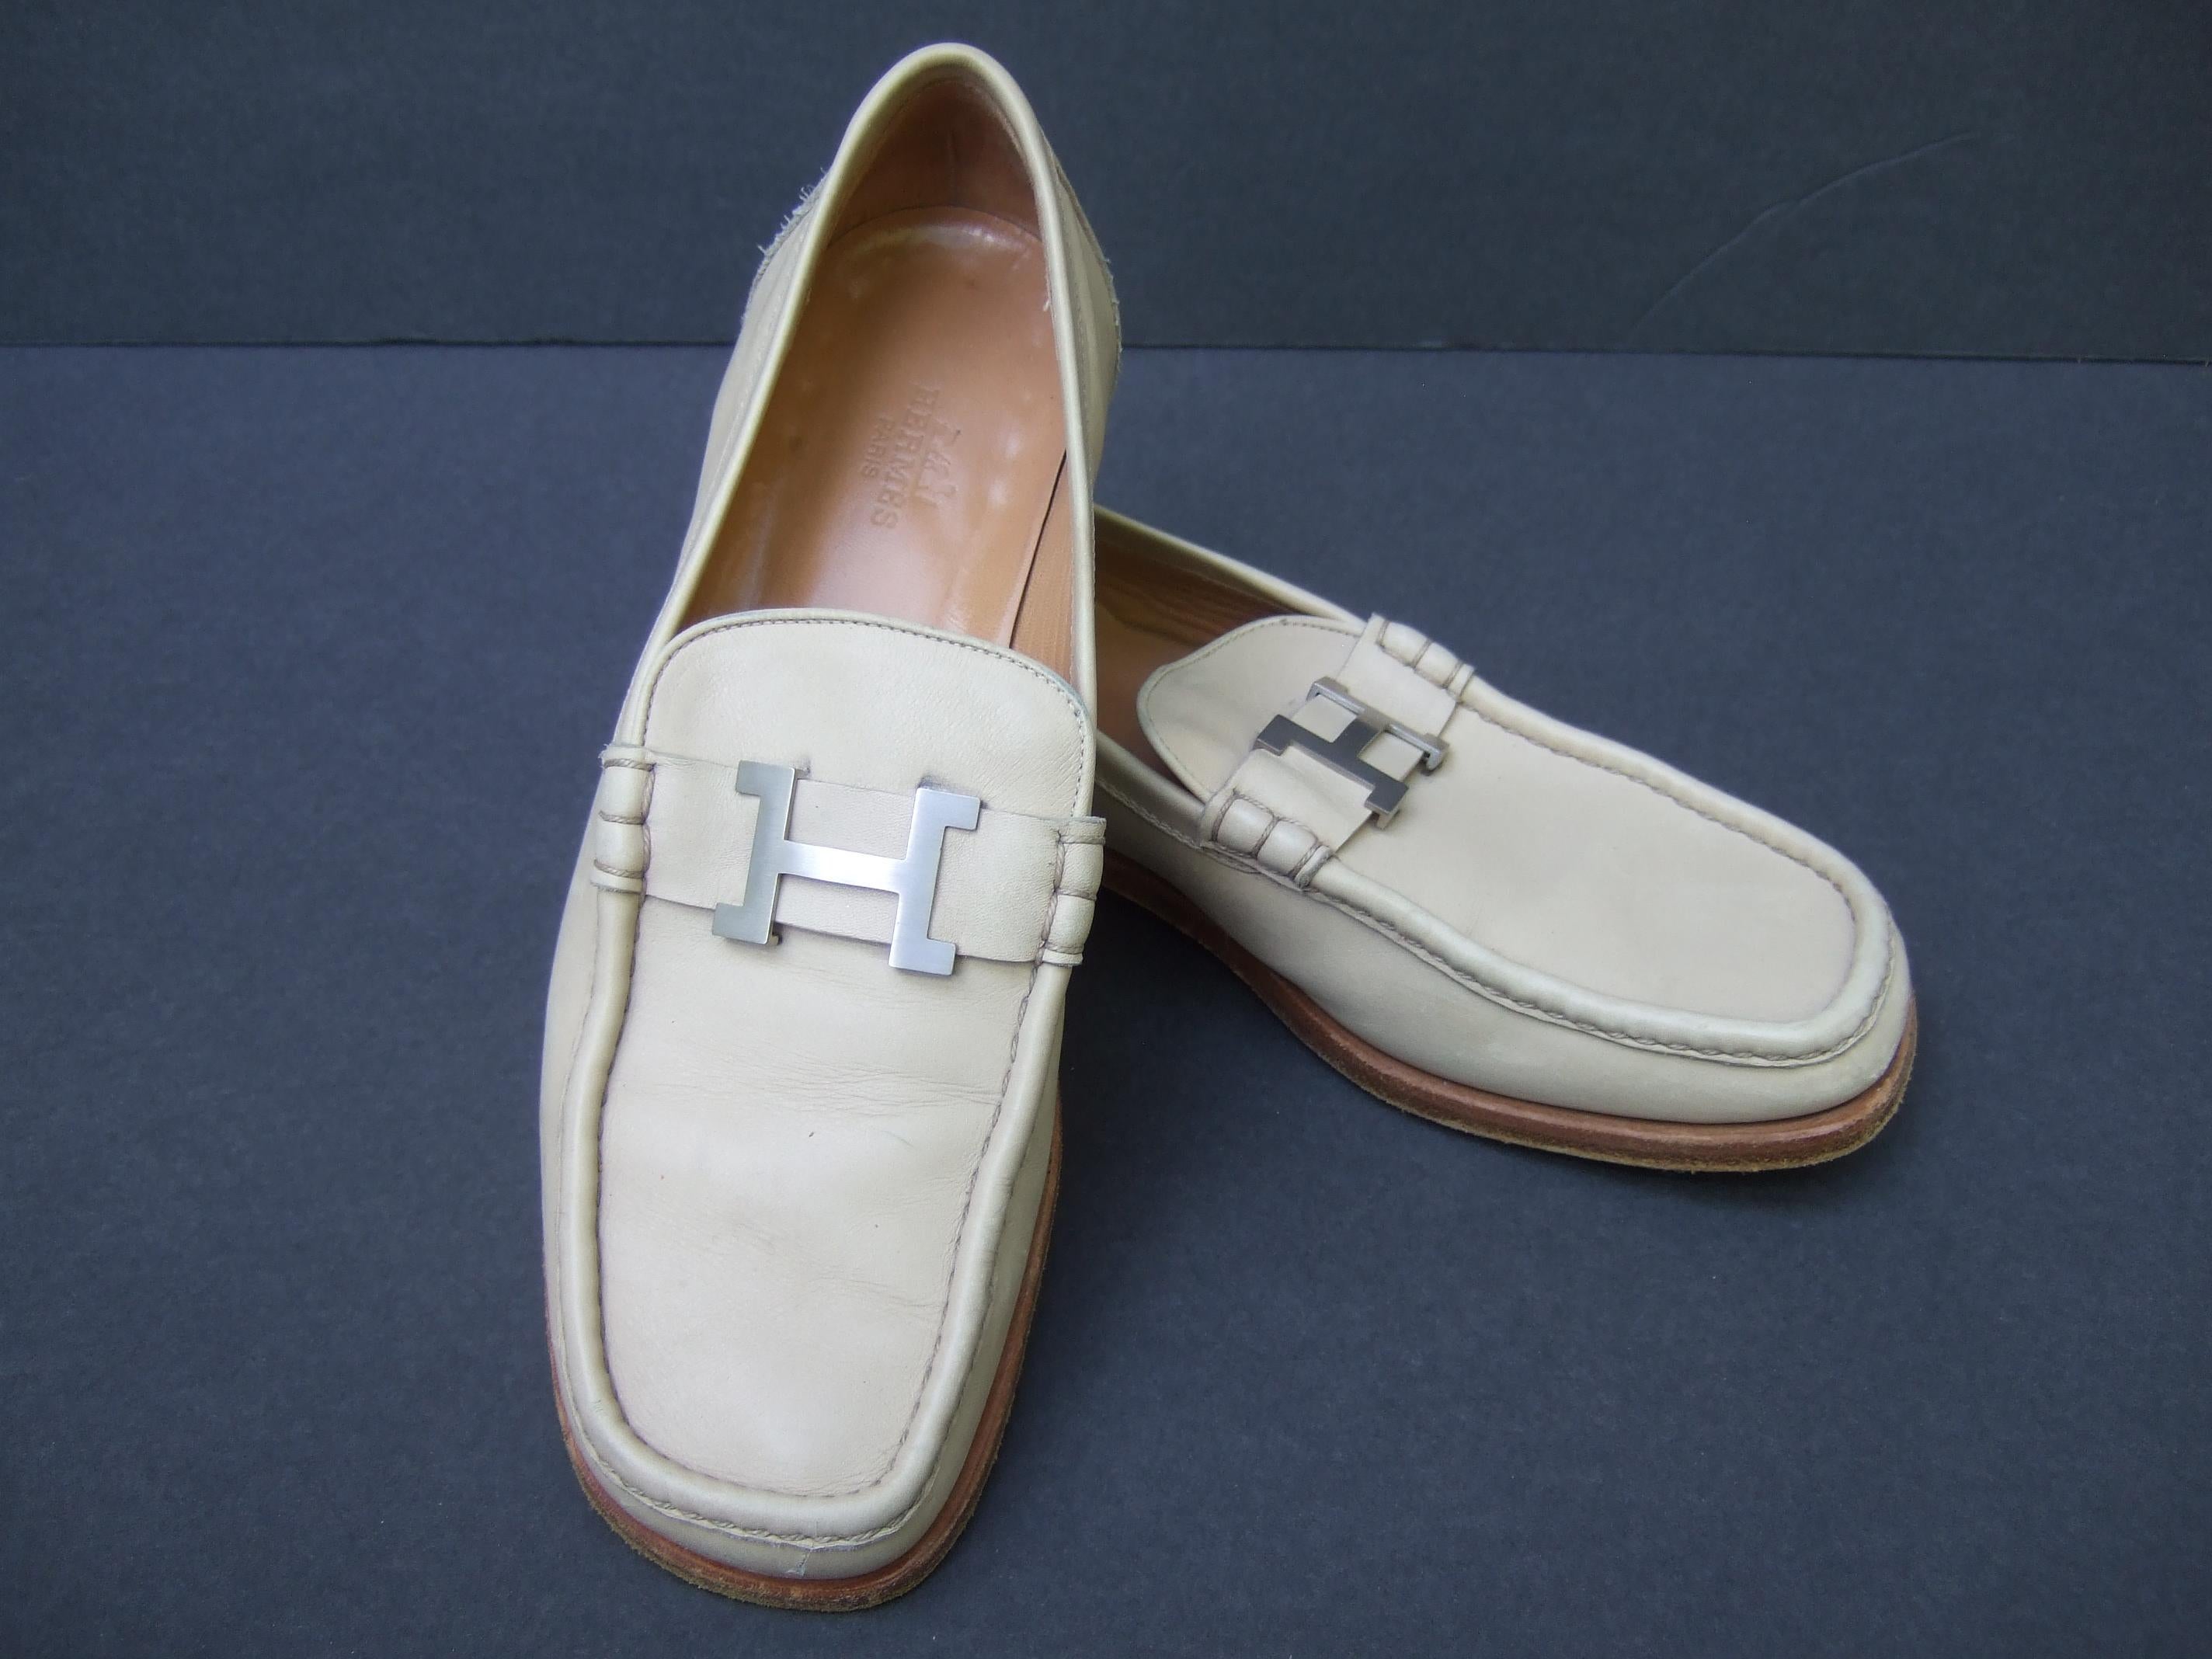 Hermes Paris Women's Constance Silver Buckle Ivory Leather Italian Loafers 1990s In Good Condition For Sale In University City, MO